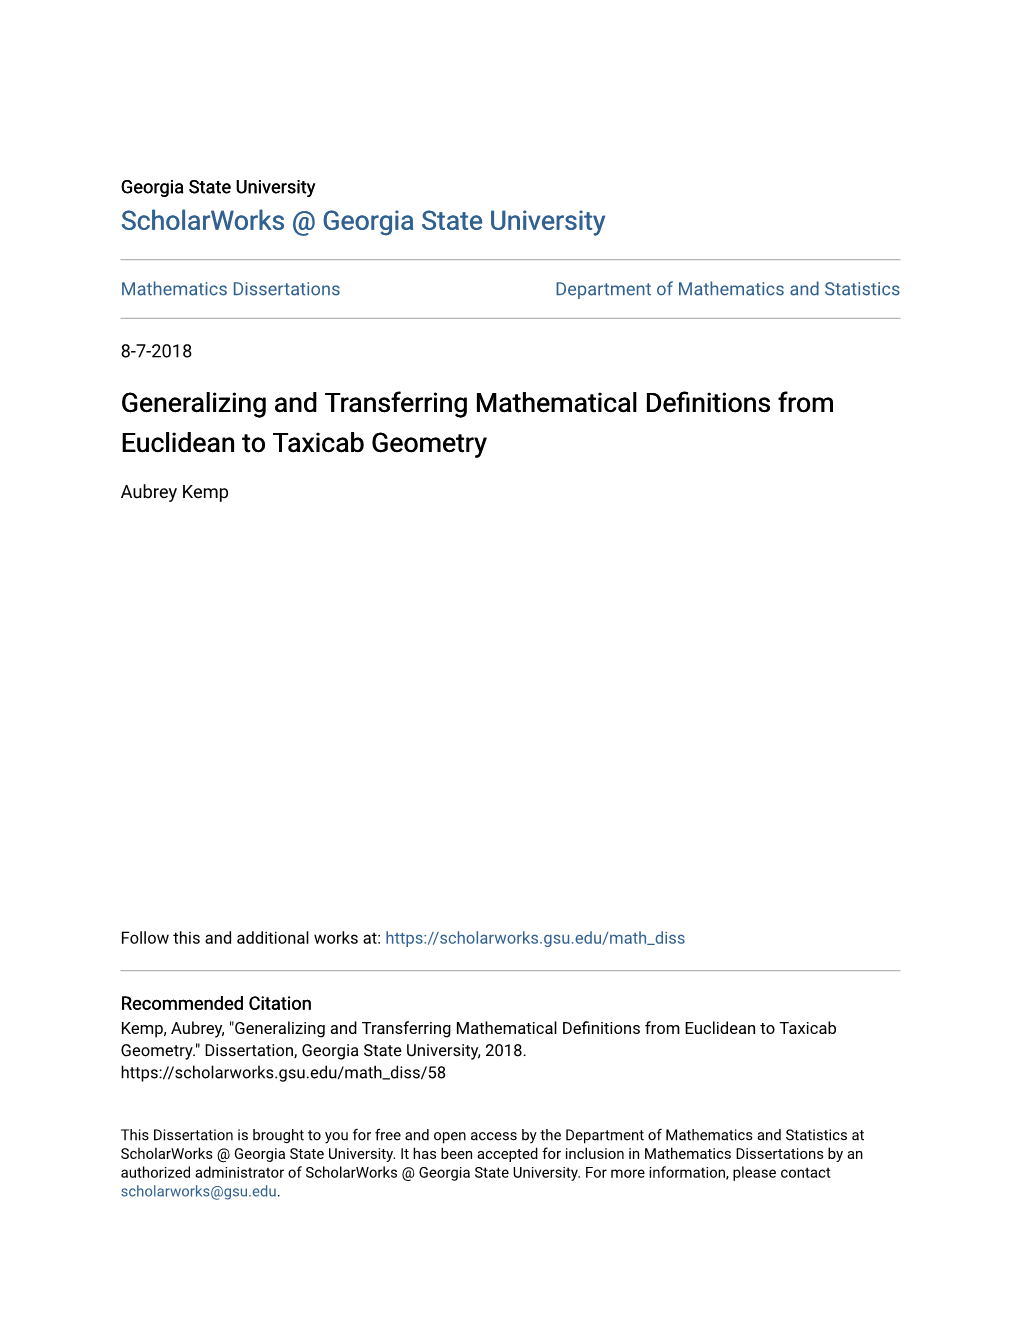 Generalizing and Transferring Mathematical Definitions from Euclidean to Taxicab Geometry